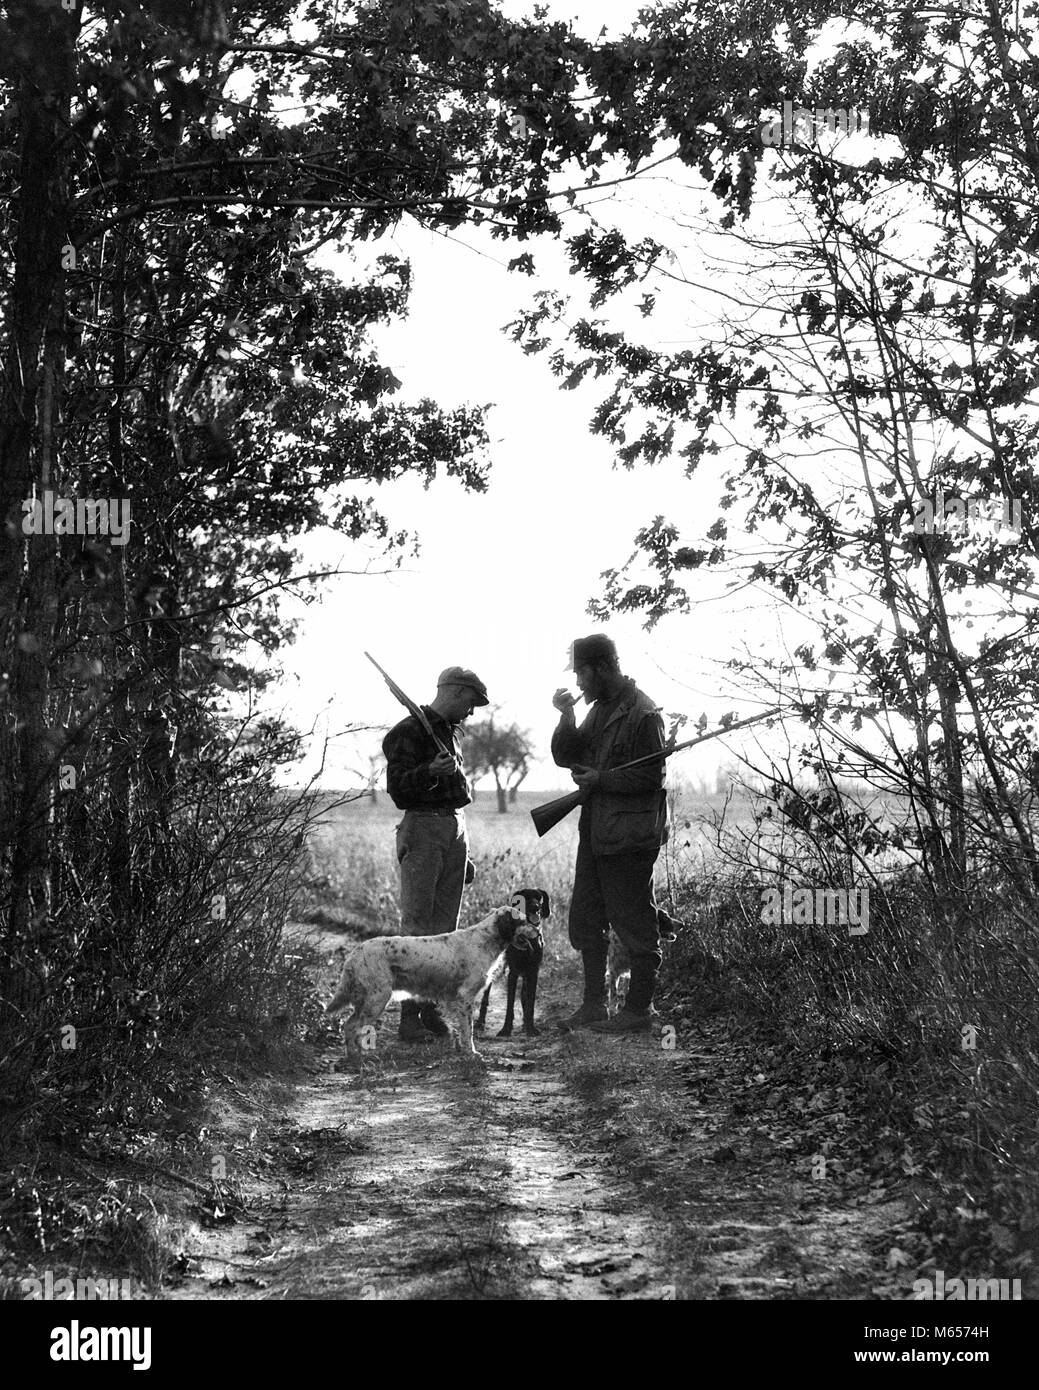 1920s 1930s TWO MEN HUNTERS ANONYMOUS SILHOUETTED WITH DOGS ON COUNTRY LANE - g942 HAR001 HARS SONS JOY LIFESTYLE RURAL FRIENDSHIP FULL-LENGTH ADOLESCENT INSPIRATION CARING ANIMALS HUNTER SPIRITUALITY CONFIDENCE NOSTALGIA FATHERS 20-25 YEARS 25-30 YEARS 30-35 YEARS FREEDOM TWO ANIMALS MAMMALS ADVENTURE LEISURE RELAXATION SILHOUETTED CANINES DADS RECREATION POOCH CONNECTION TEENAGED ANONYMOUS CANINE FIREARM FIREARMS HUNTERS JUVENILES MALES MAMMAL MID-ADULT MID-ADULT MAN SHOTGUNS YOUNG ADULT MAN B&W BLACK AND WHITE COUNTRY LANE OLD FASHIONED PERSONS Stock Photo